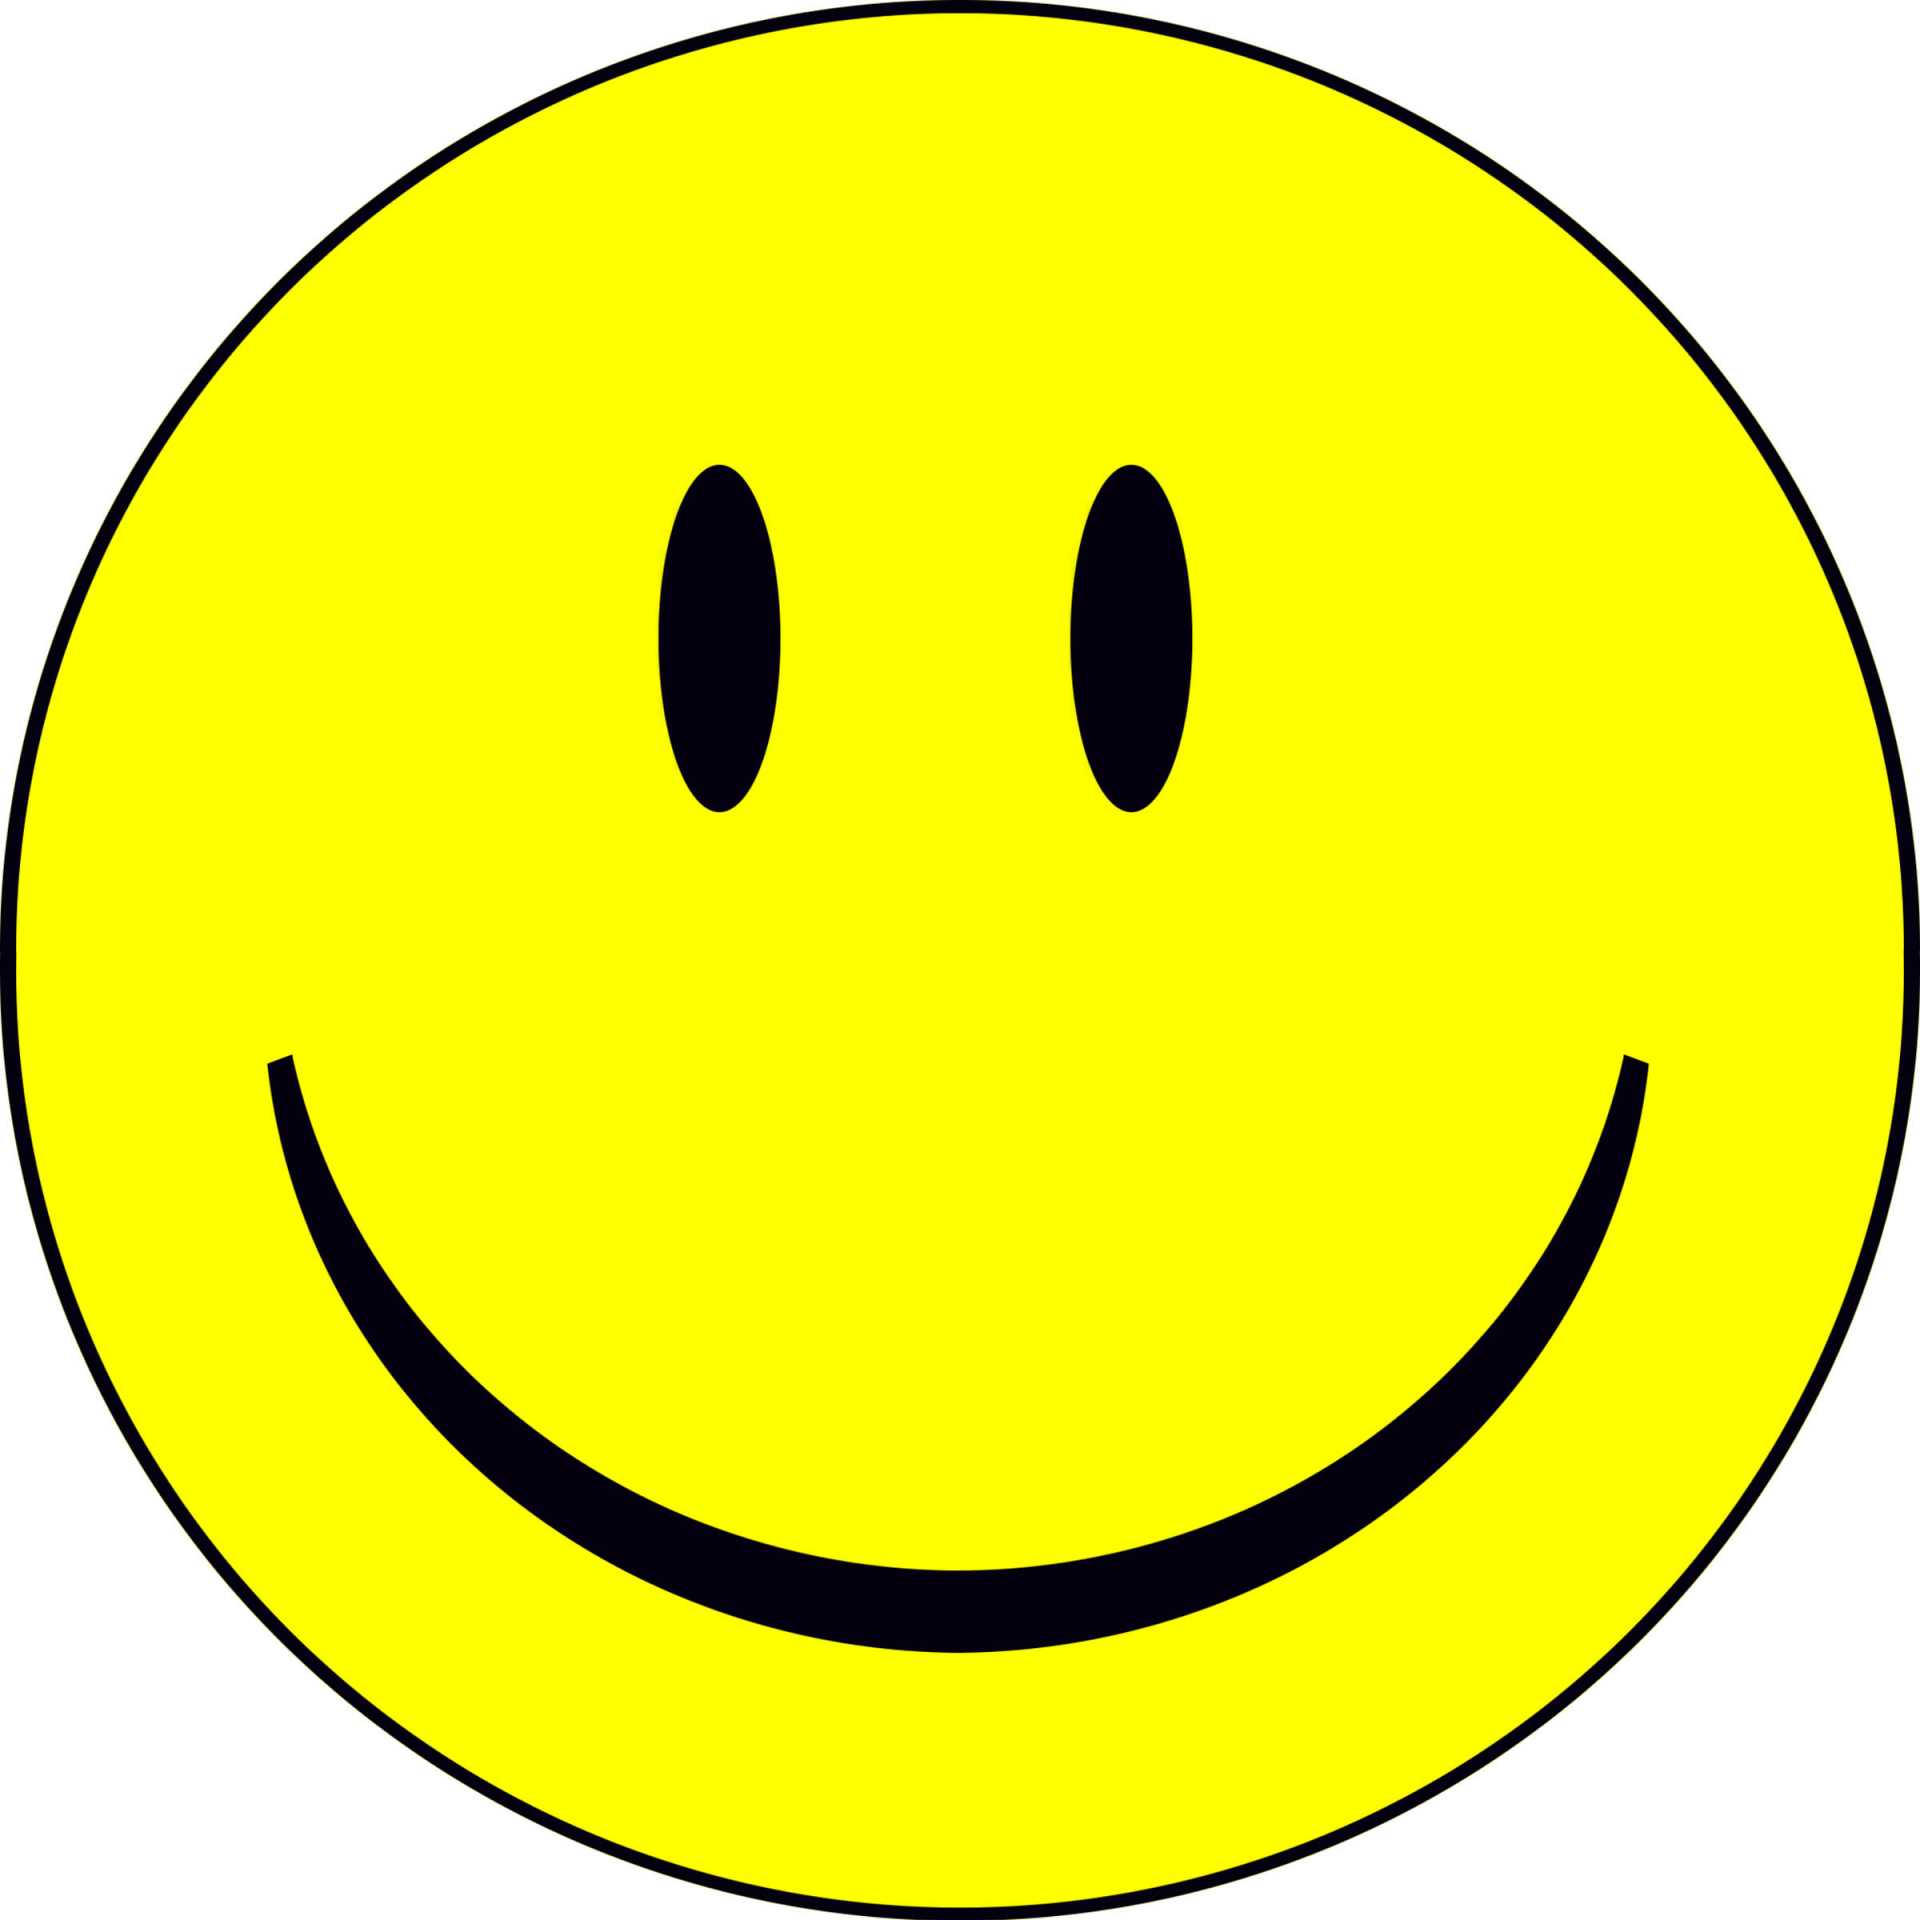 The smiley face. - Off-Topic - Giant Bomb - ClipArt Best - ClipArt ...